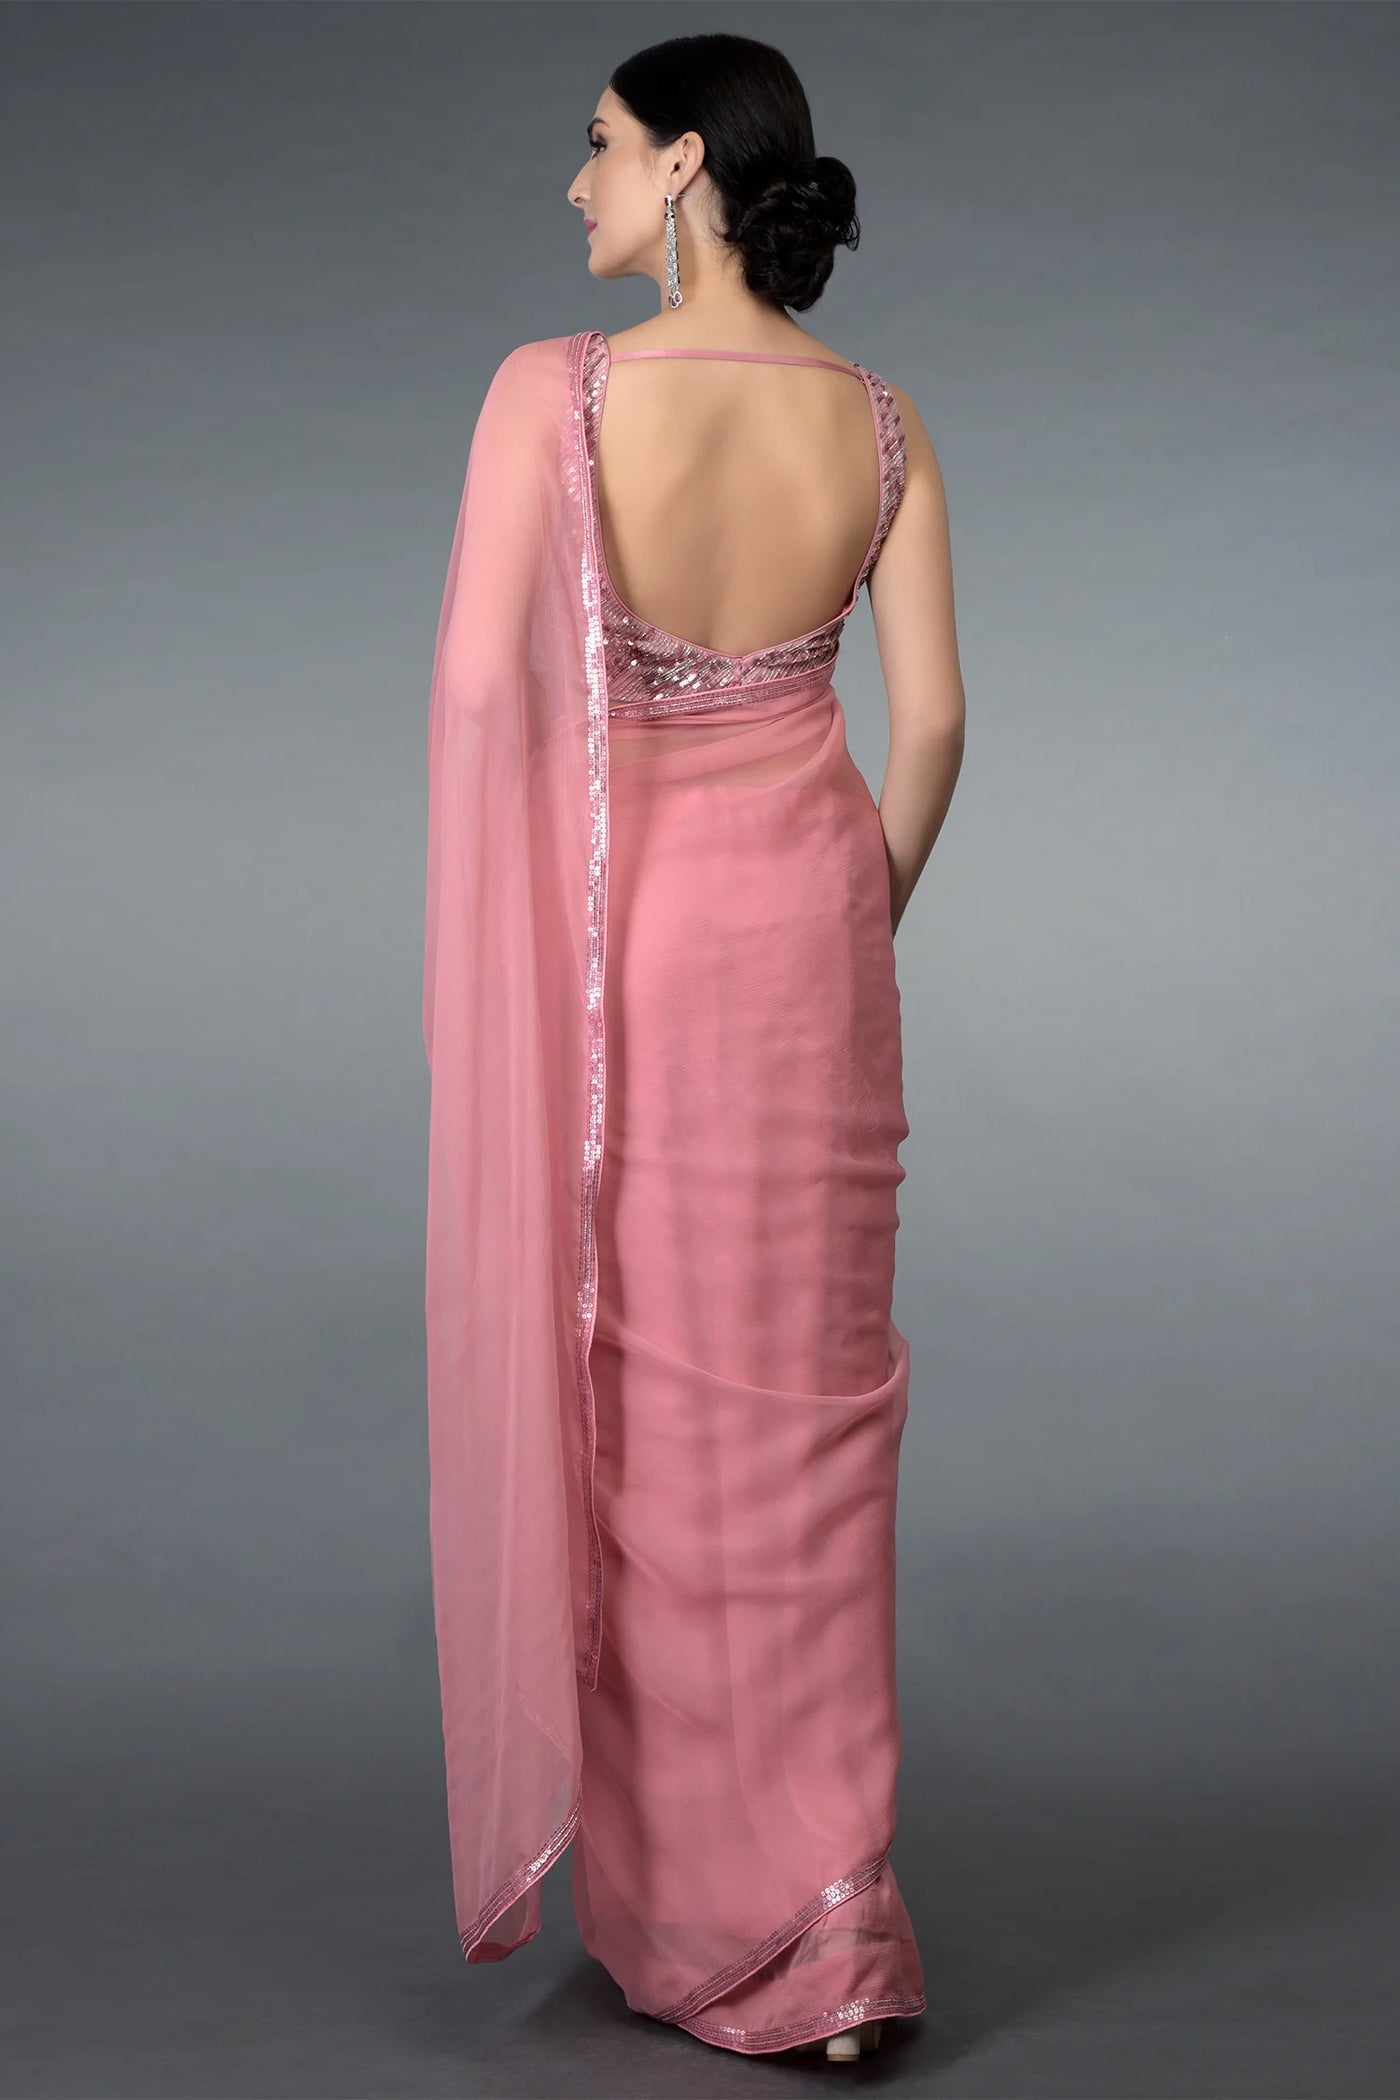 Pink Pure Chiffon Saree Set Indian Clothing in Denver, CO, Aurora, CO, Boulder, CO, Fort Collins, CO, Colorado Springs, CO, Parker, CO, Highlands Ranch, CO, Cherry Creek, CO, Centennial, CO, and Longmont, CO. NATIONWIDE SHIPPING USA- India Fashion X